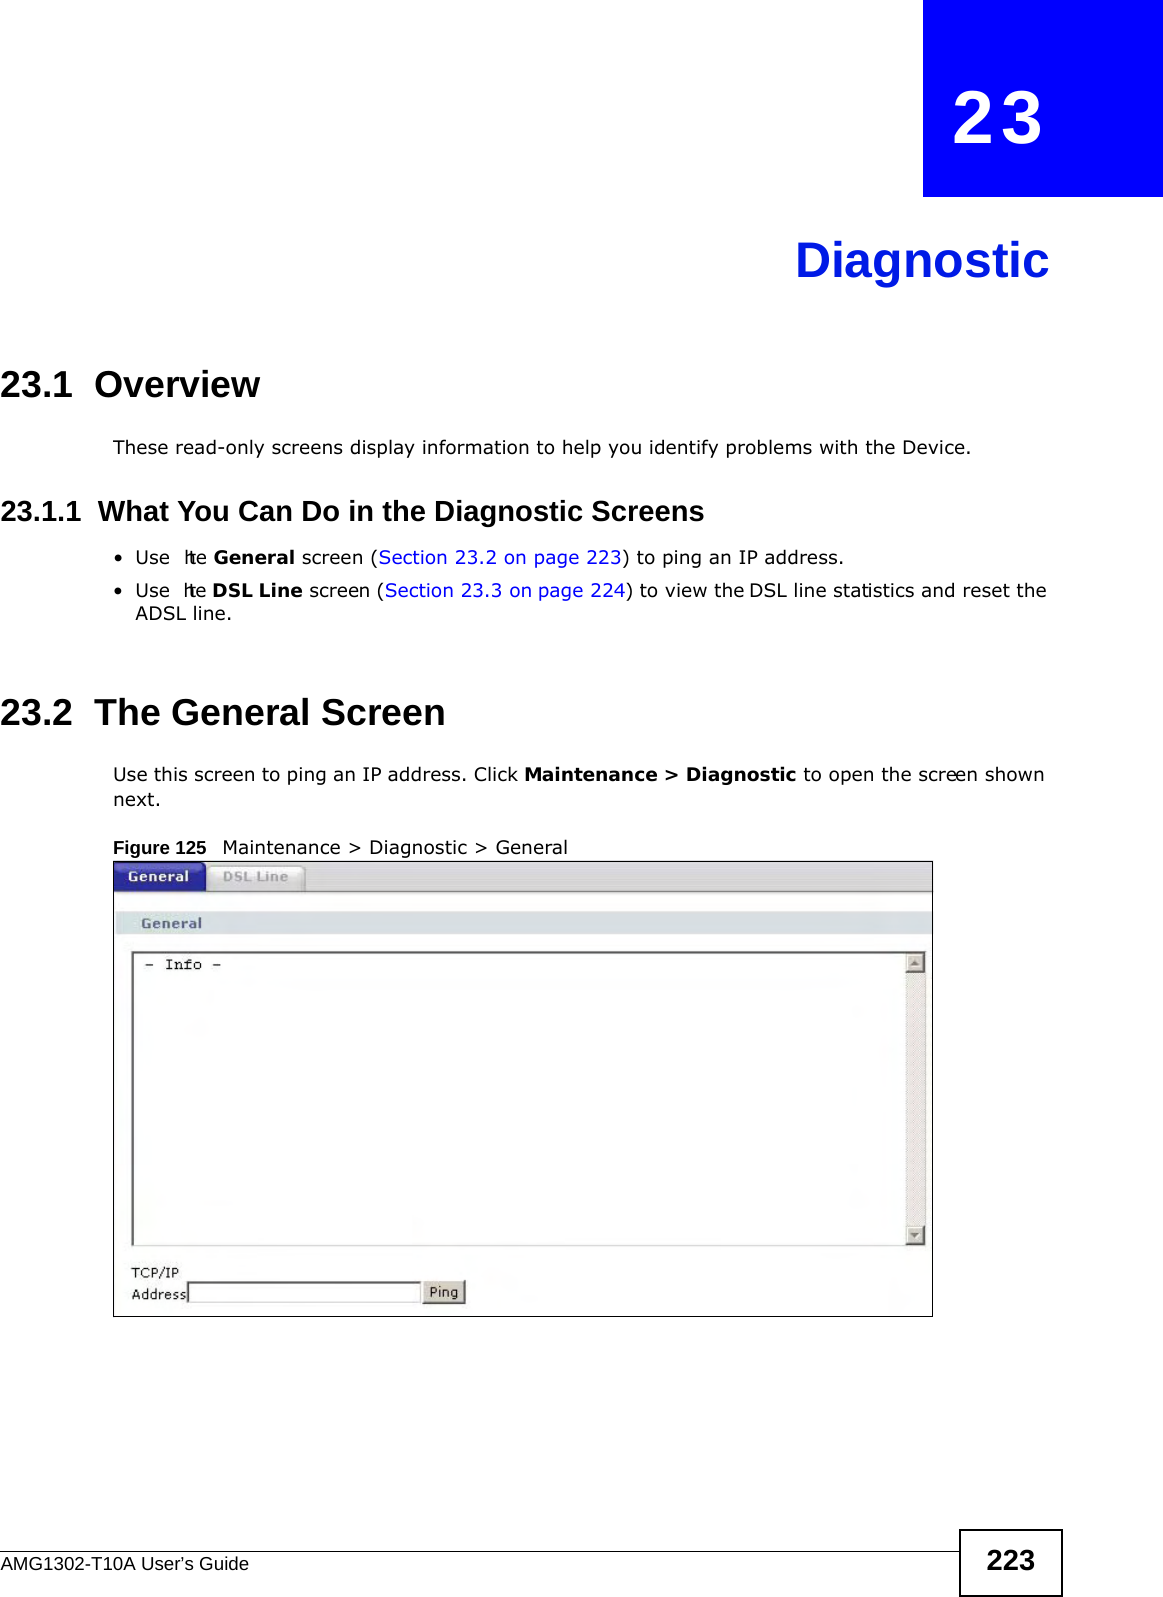 AMG1302-T10A User’s Guide 223CHAPTER   23Diagnostic23.1  OverviewThese read-only screens display information to help you identify problems with the Device.23.1.1  What You Can Do in the Diagnostic Screens•Use  the General screen (Section 23.2 on page 223) to ping an IP address.•Use  the DSL Line screen (Section 23.3 on page 224) to view the DSL line statistics and reset the ADSL line.23.2  The General Screen Use this screen to ping an IP address. Click Maintenance &gt; Diagnostic to open the screen shown next.Figure 125   Maintenance &gt; Diagnostic &gt; General